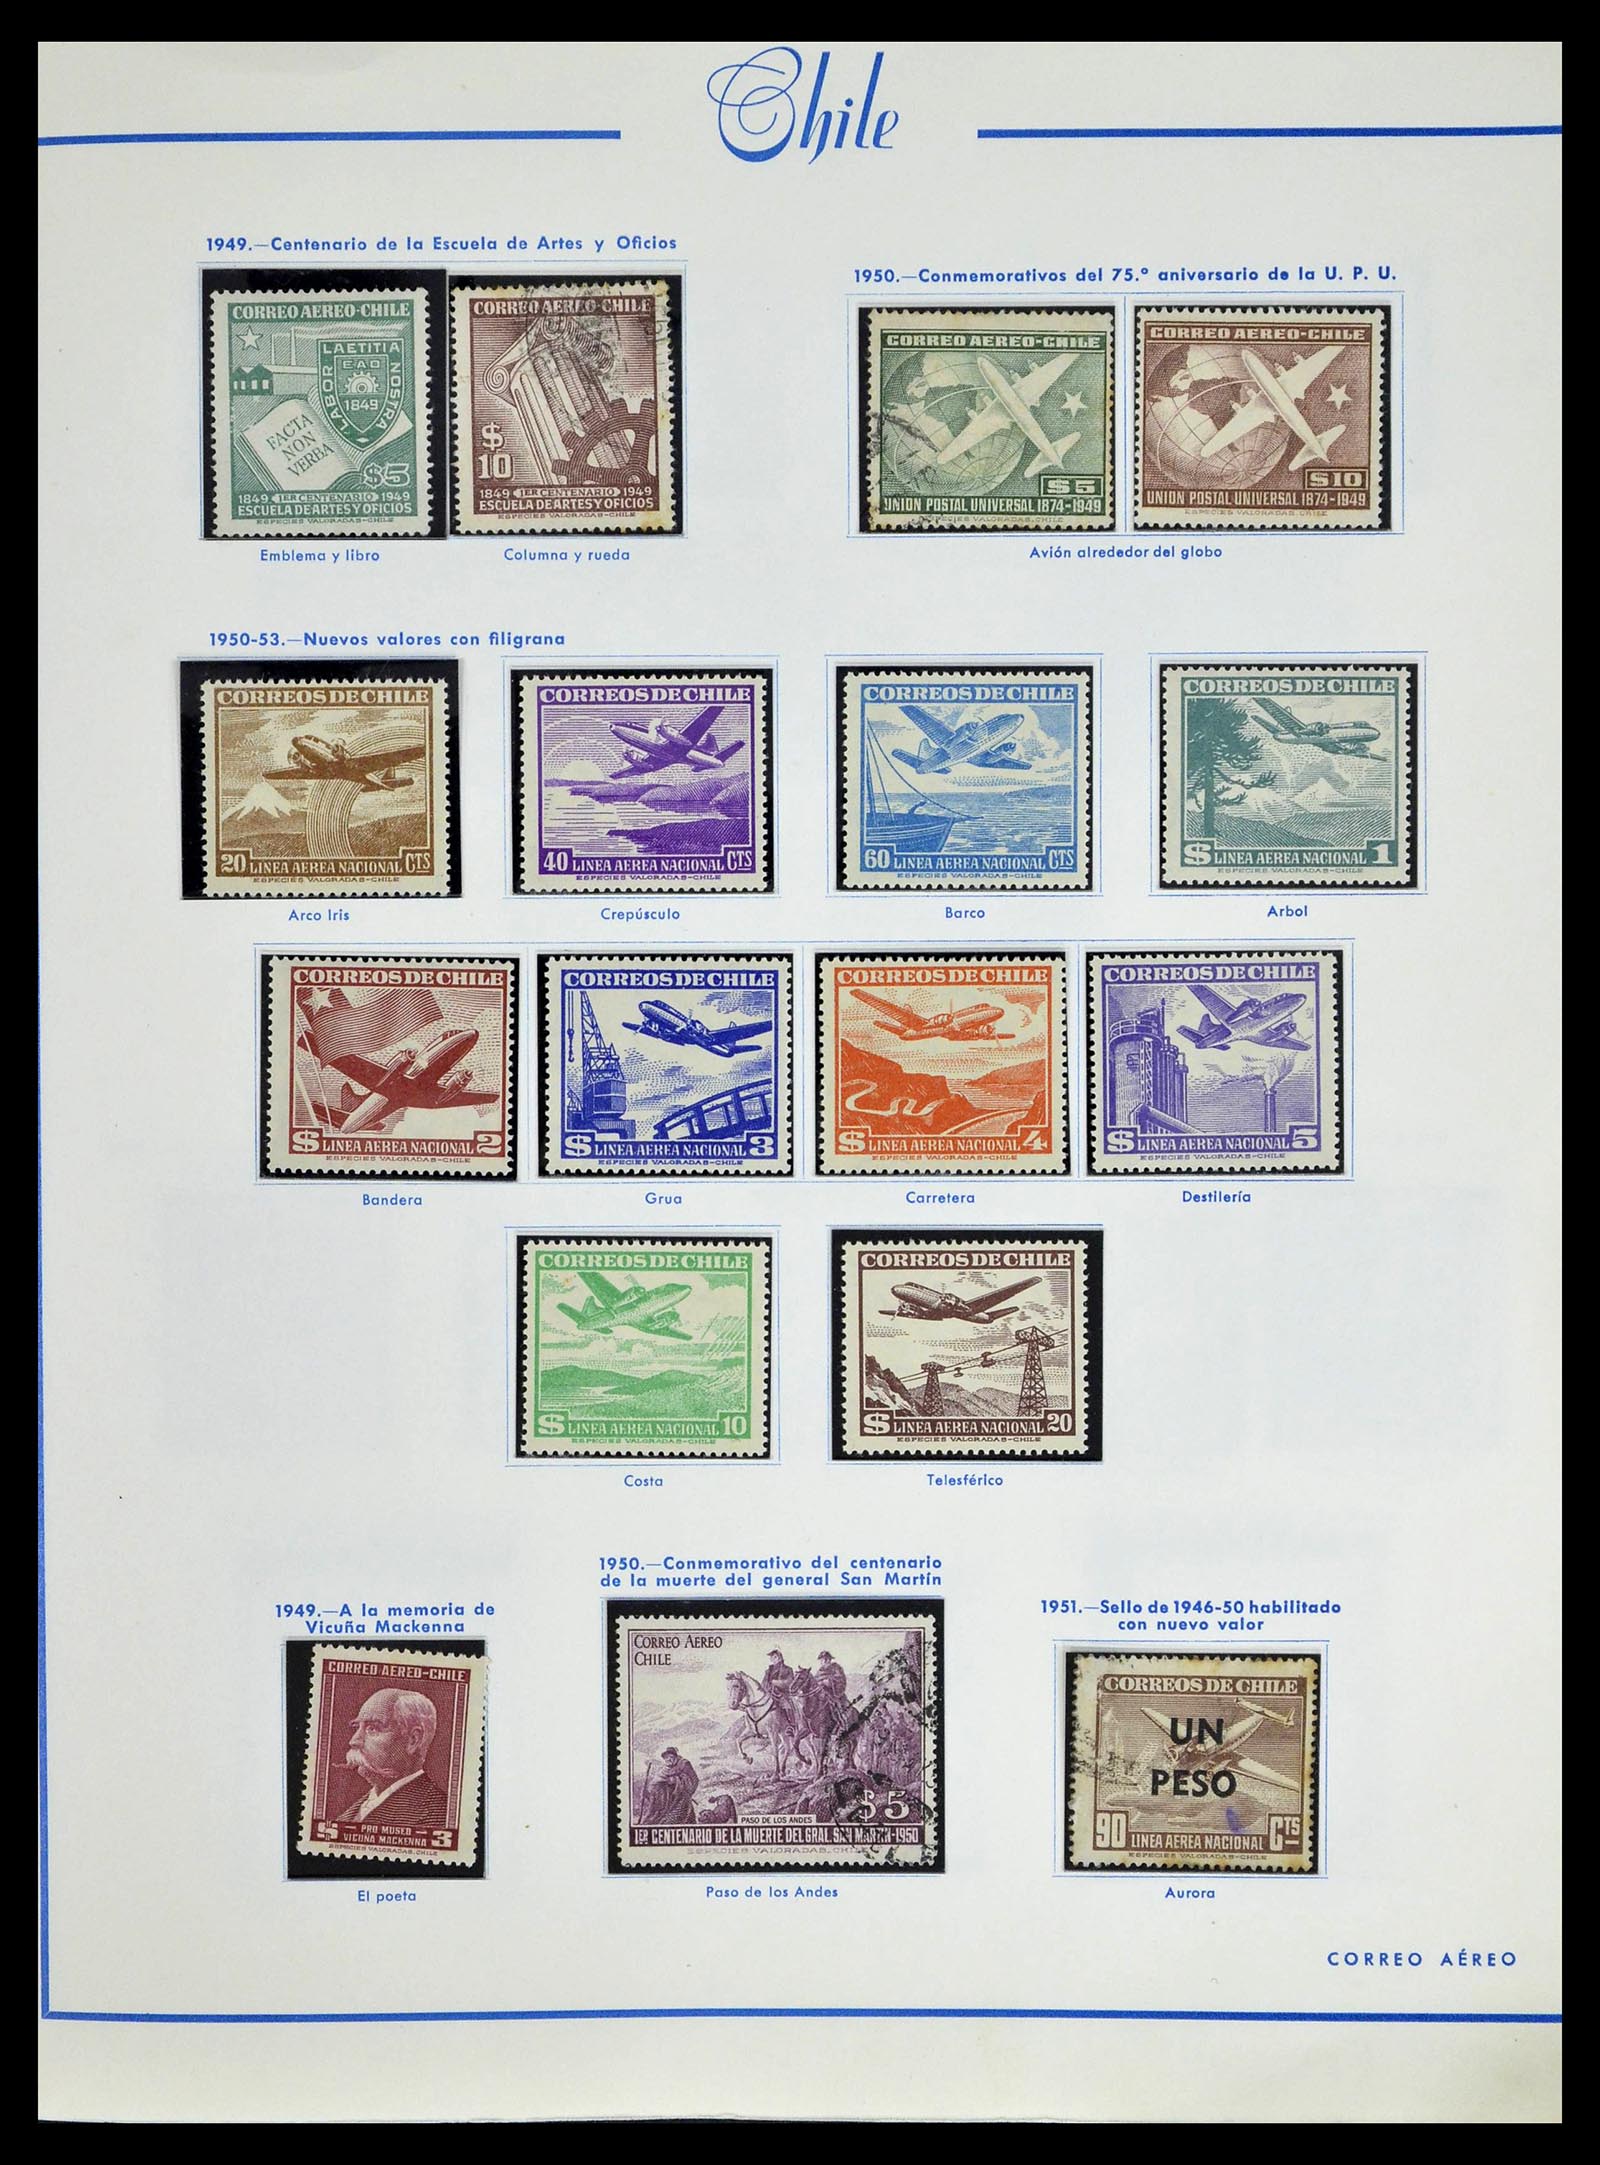 39213 0051 - Stamp collection 39213 Chile 1853-1970.